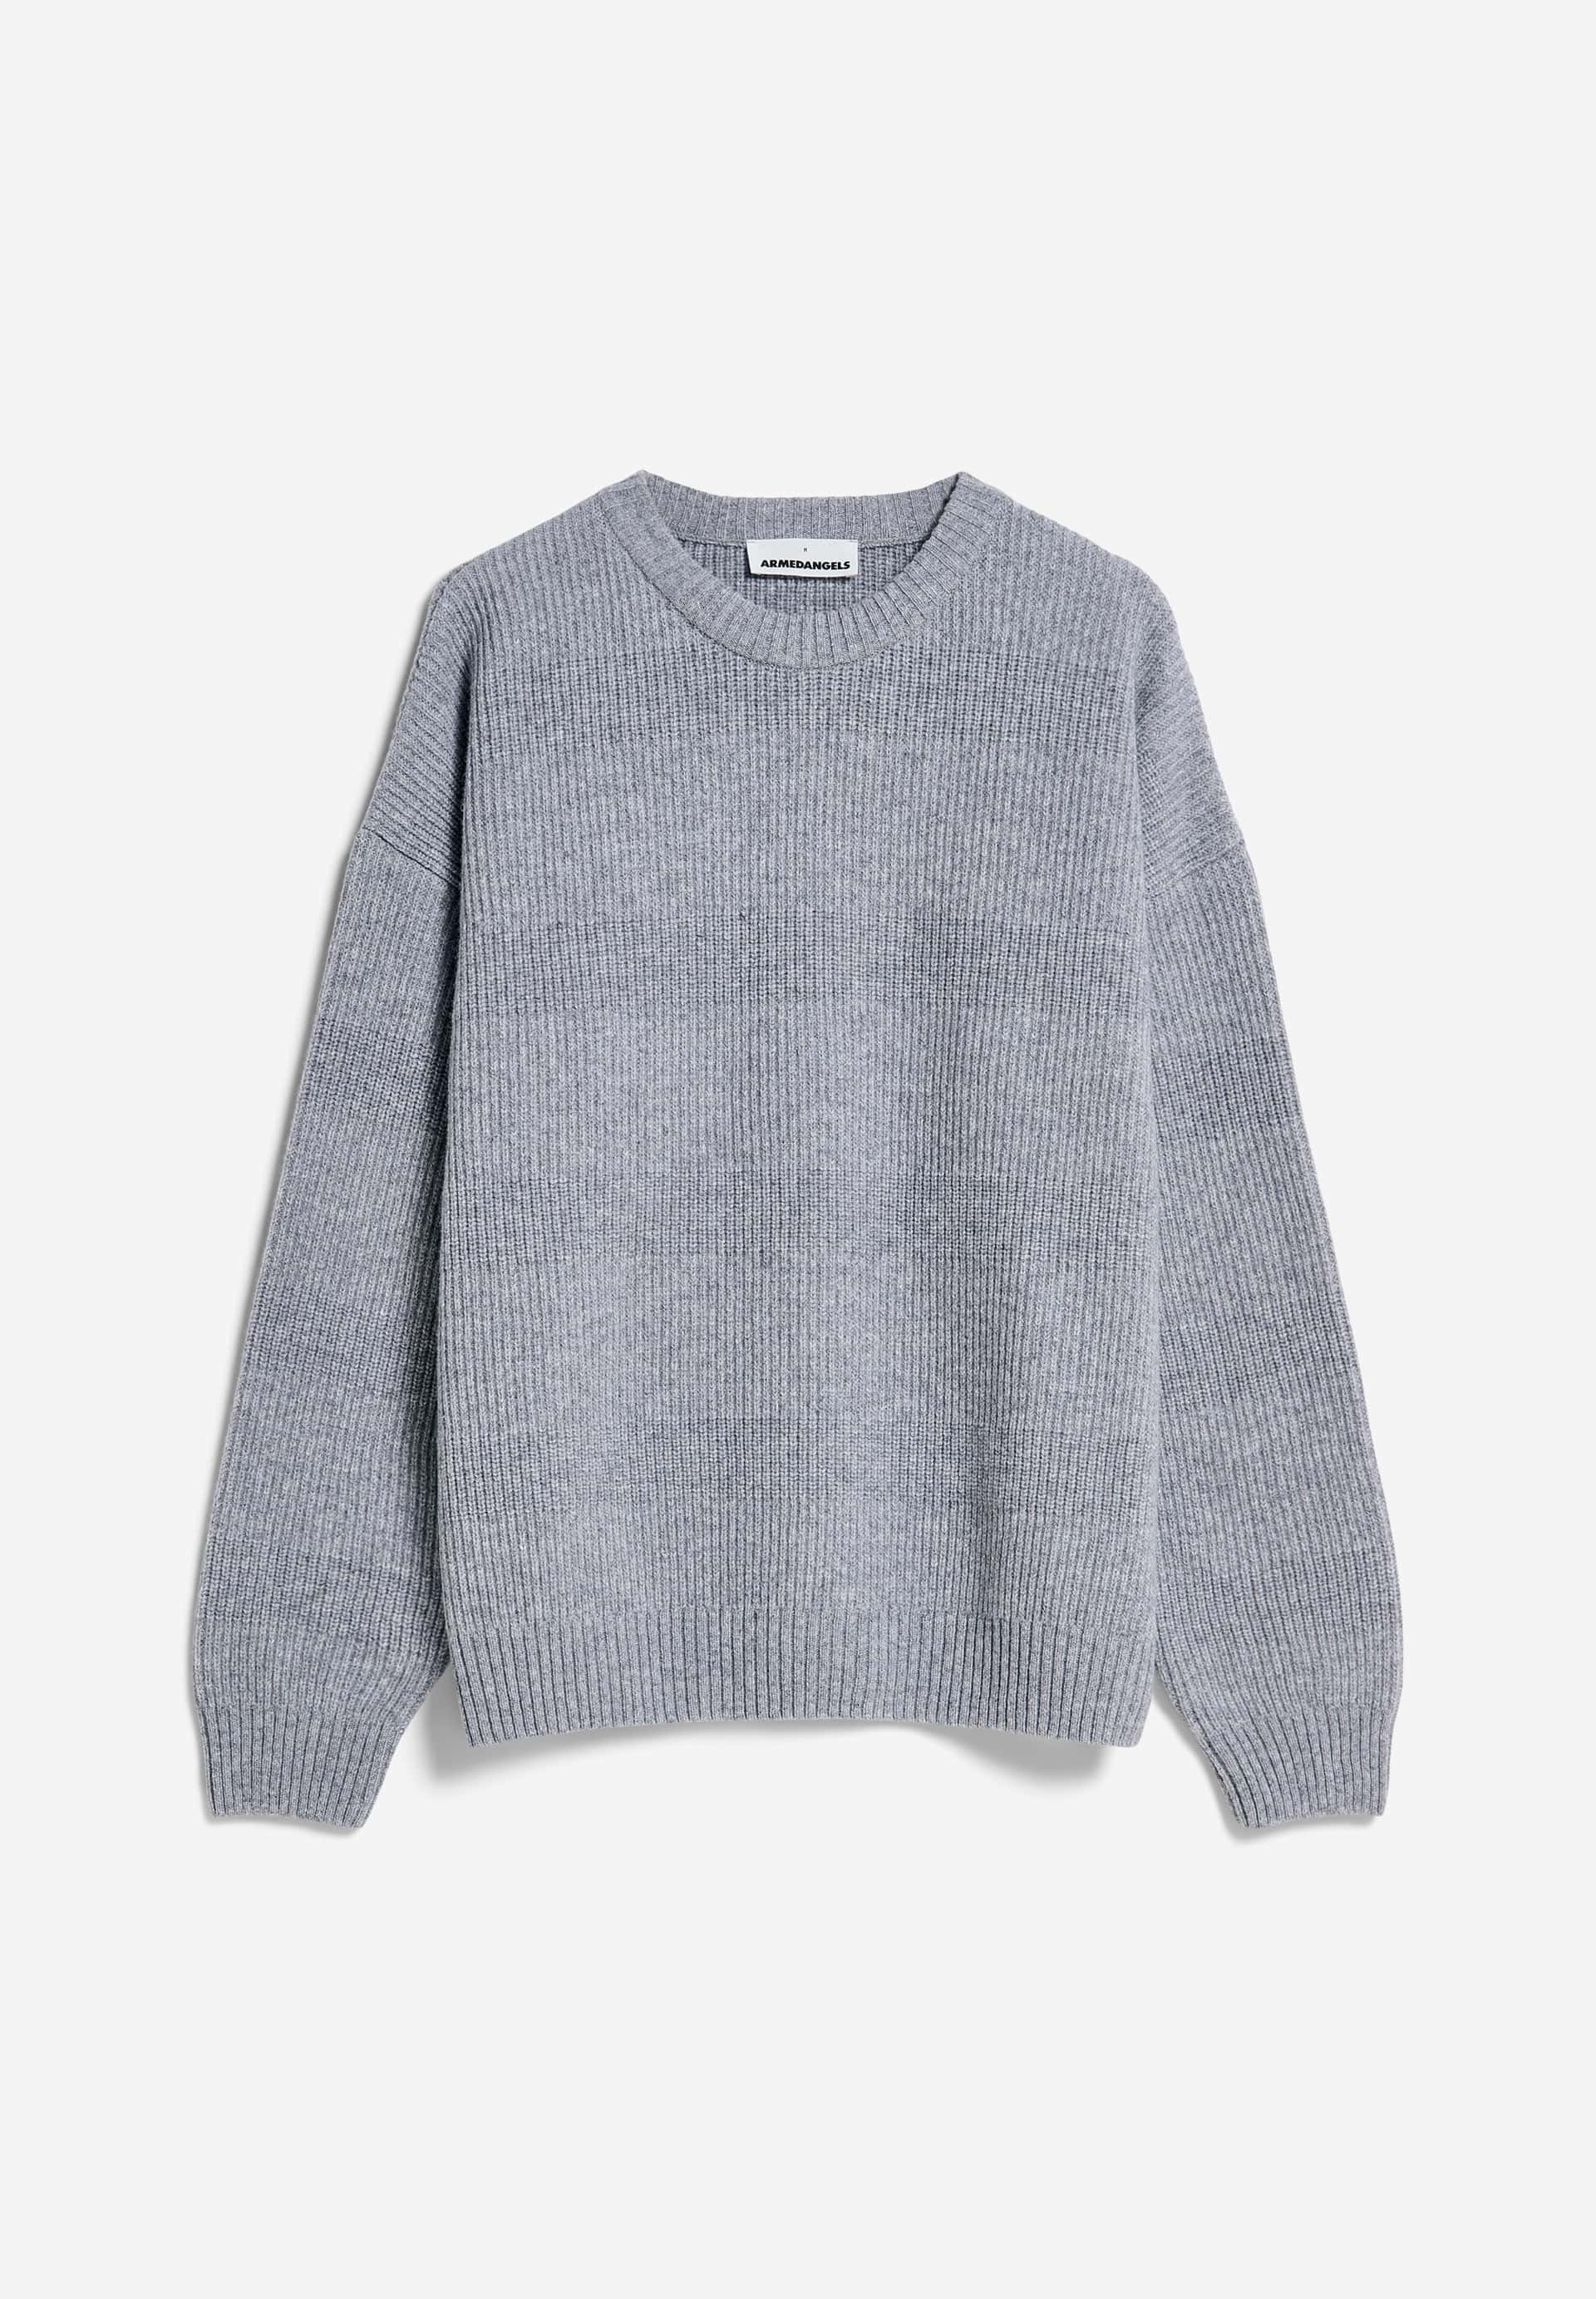 VISKAANO Sweater Relaxed Fit made of Organic Wool Mix